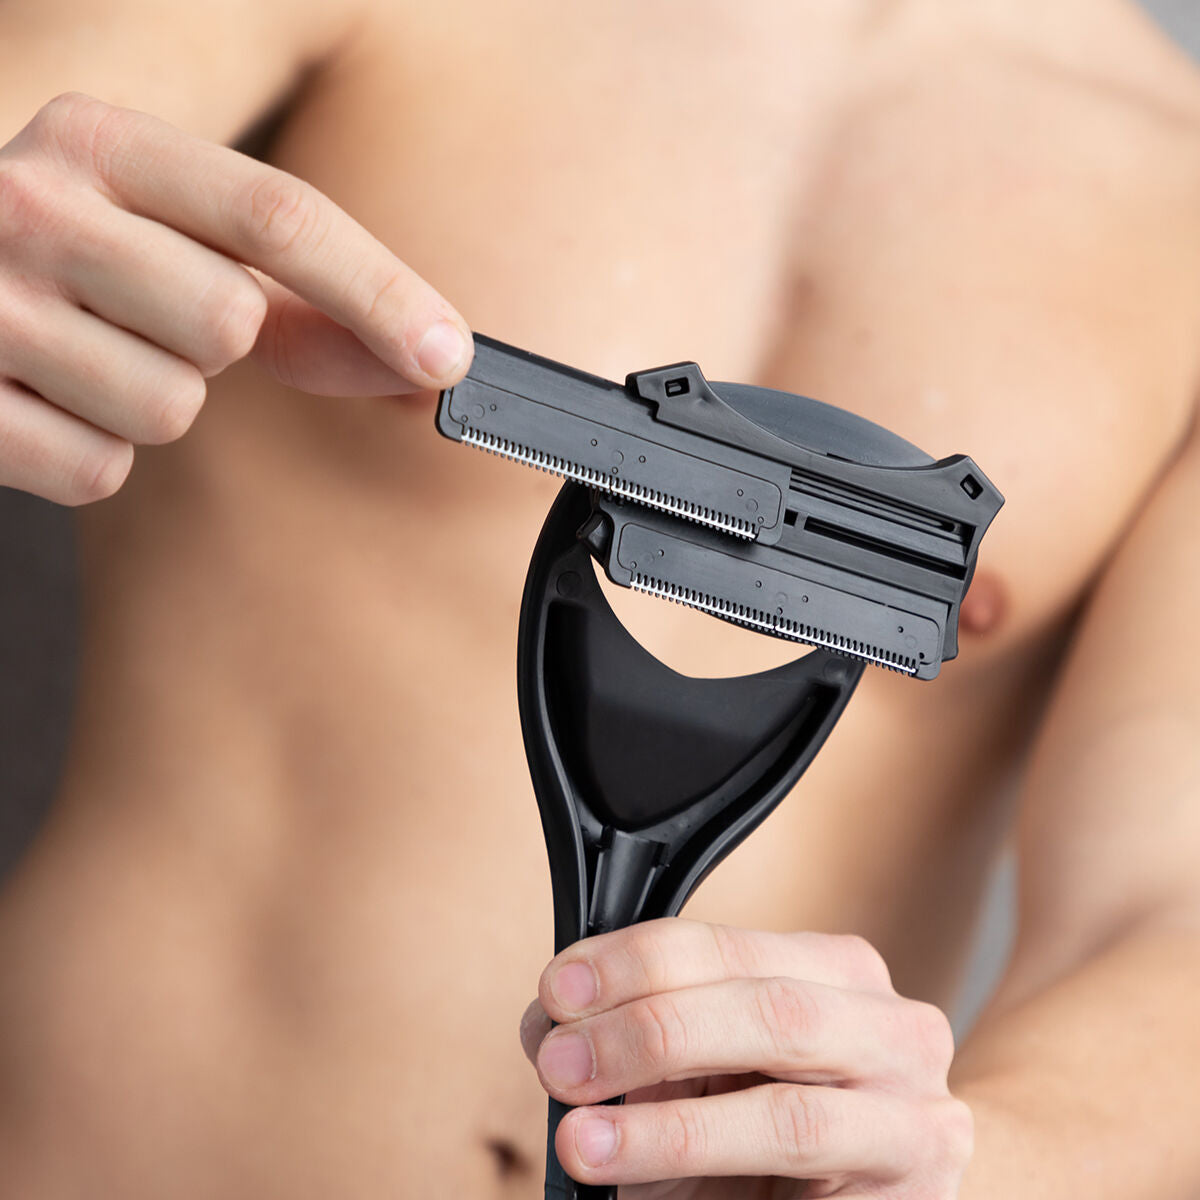 Folding shaver for back and body Omniver InnovaGoods